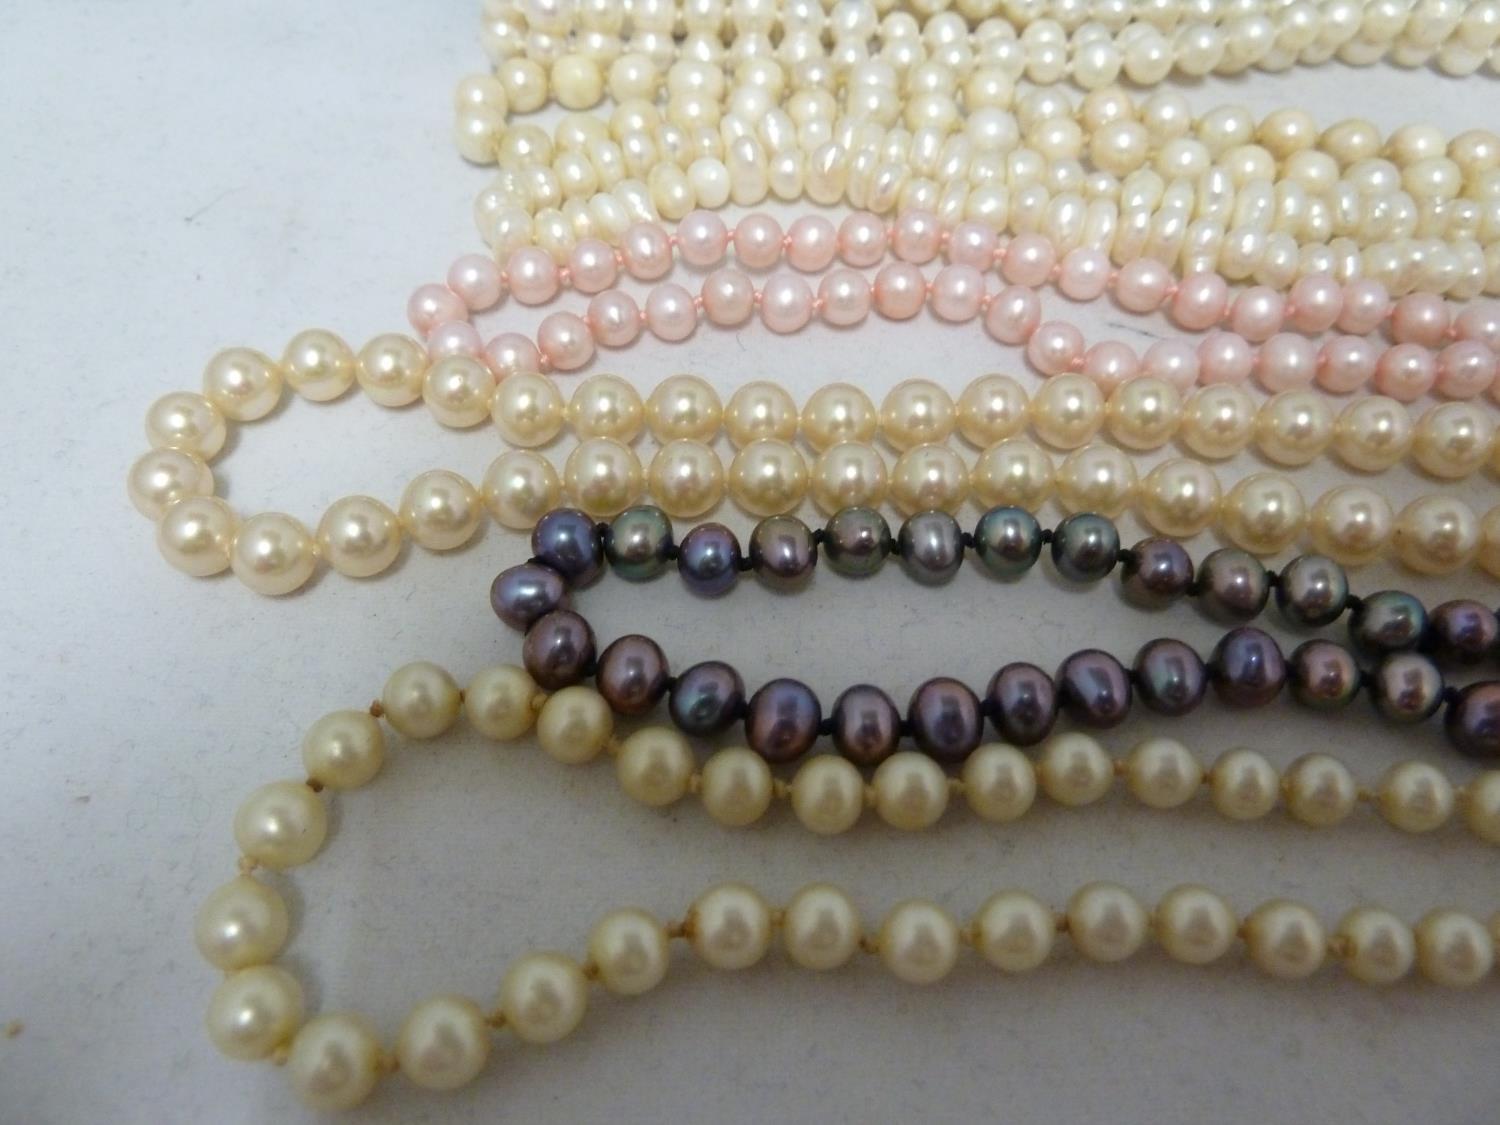 WITHDRAWN - Various pearl necklaces - including a freshwater necklet of small sized pearls - Image 4 of 5